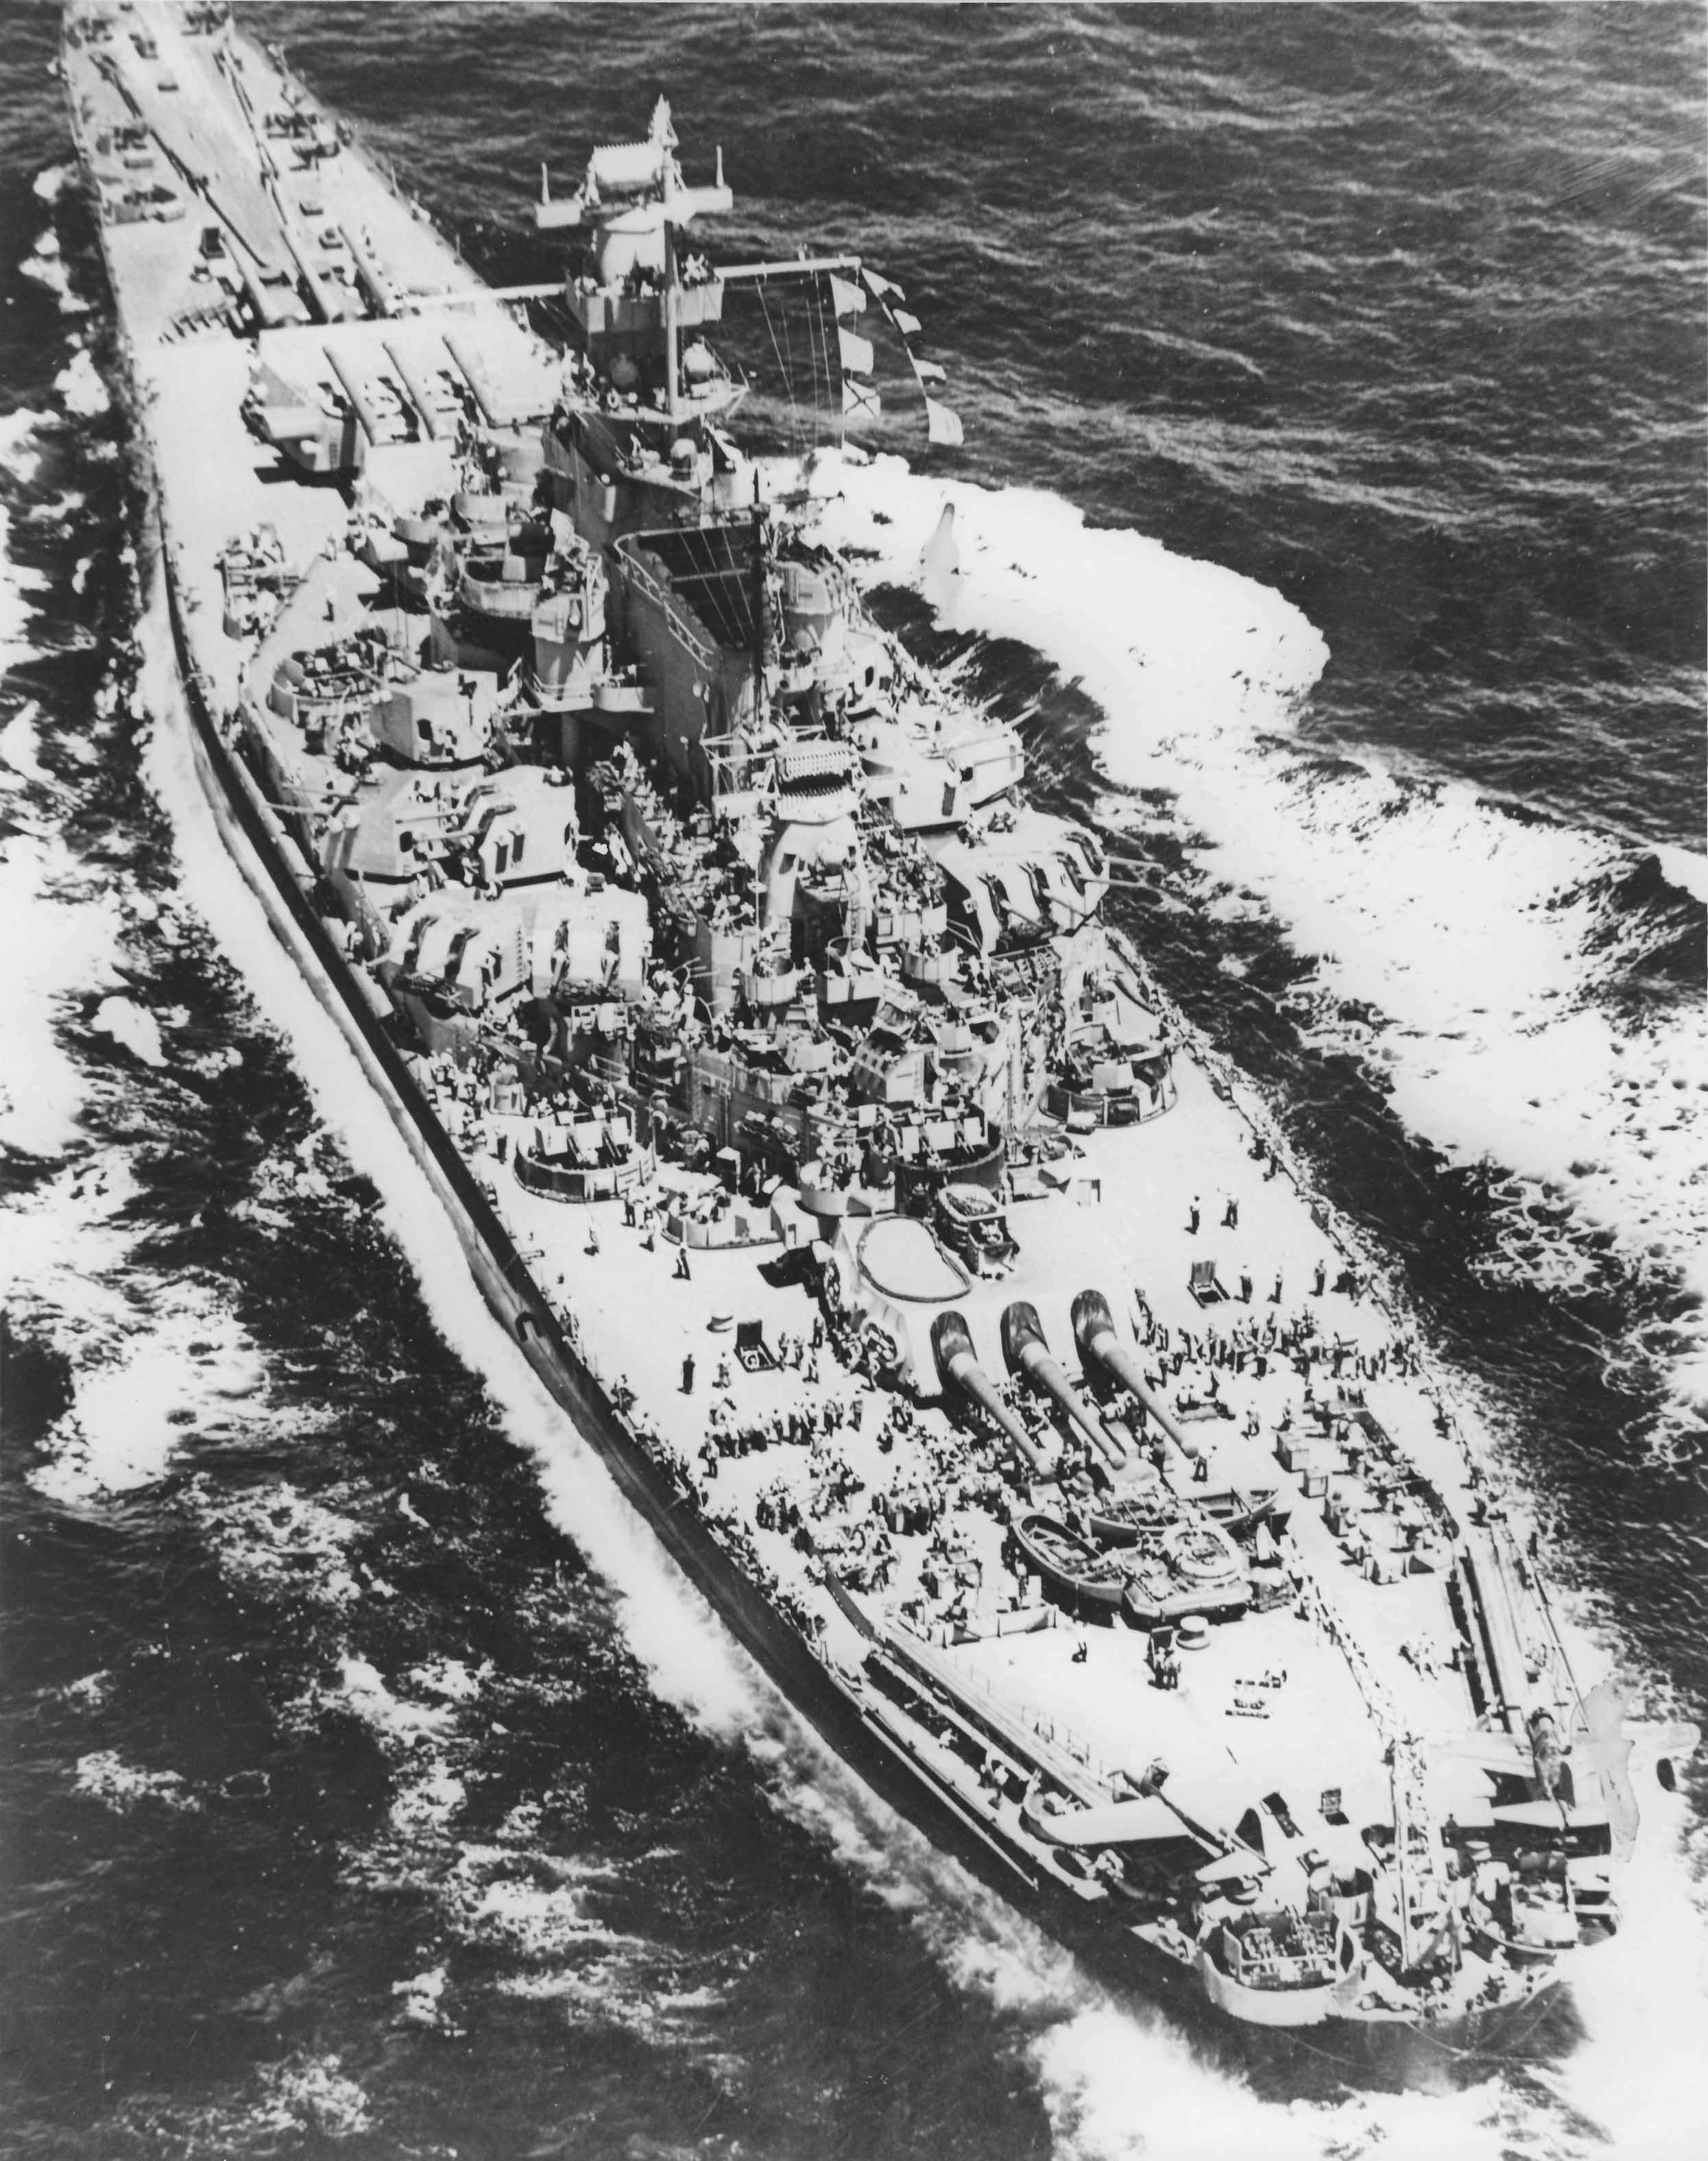 Aerial view of US battleship Massachusetts, 1943; note OS2U Kingfisher float planes on the fantail catapults